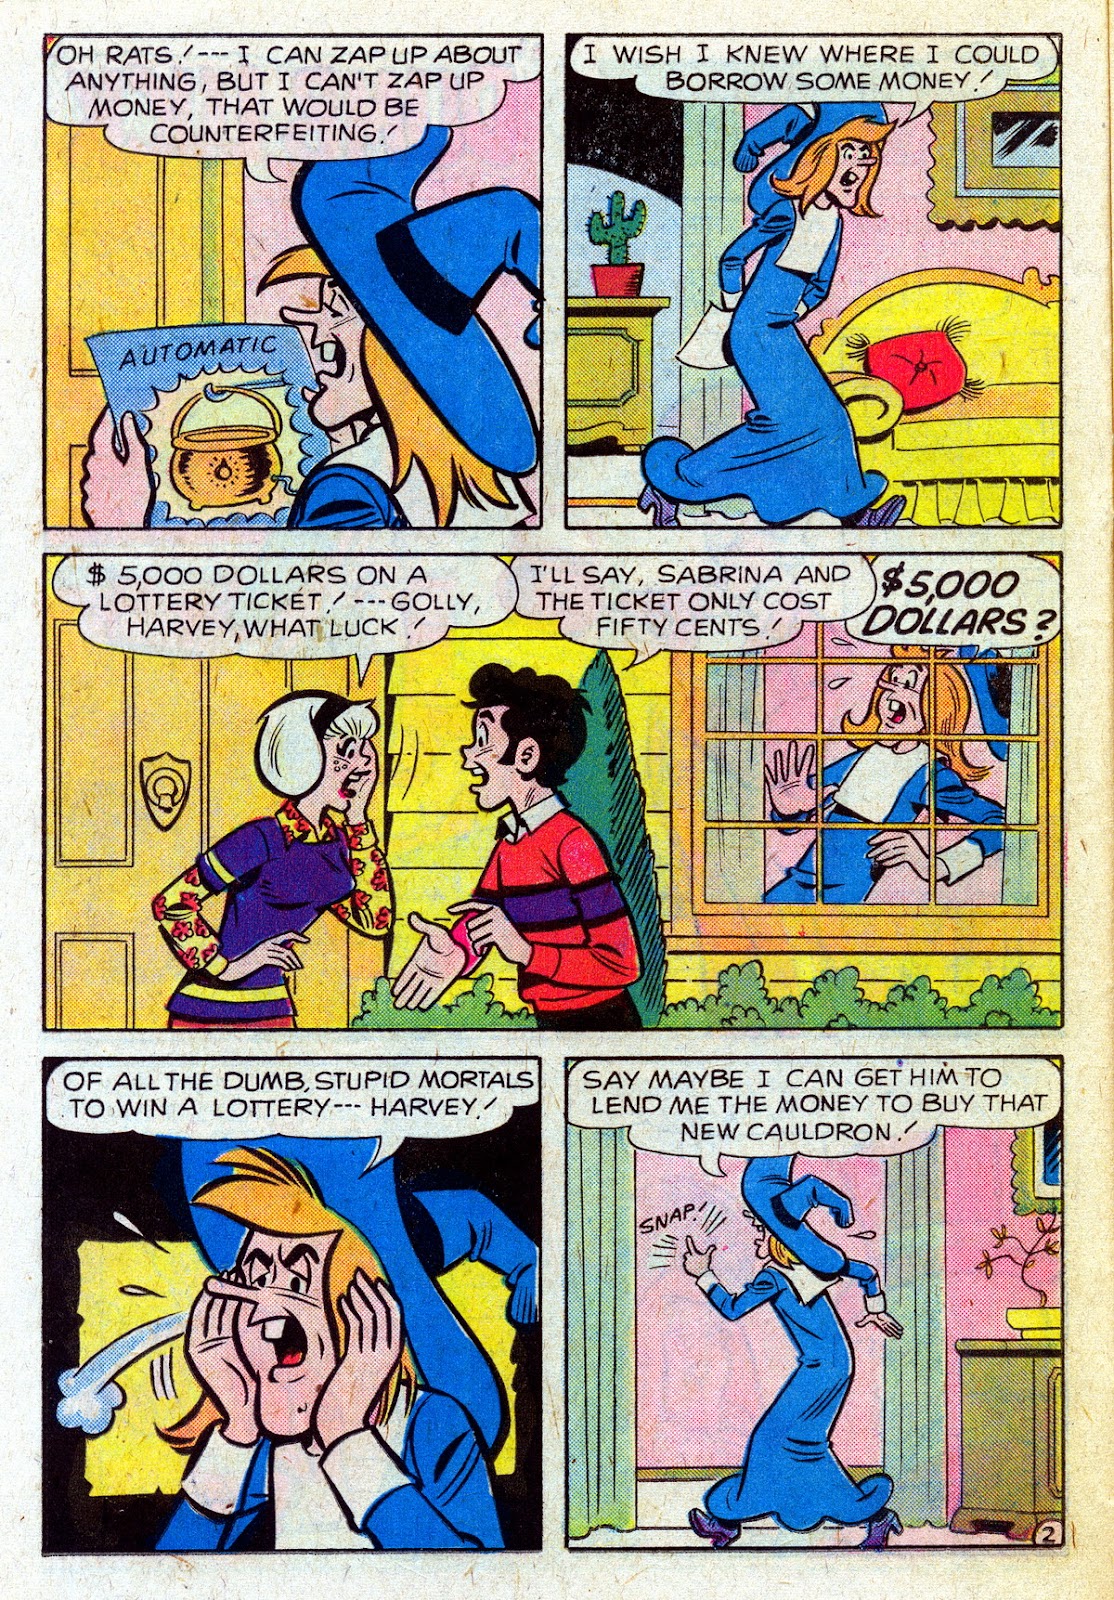 Sabrina The Teenage Witch (1971) Issue #32 #32 - English 14